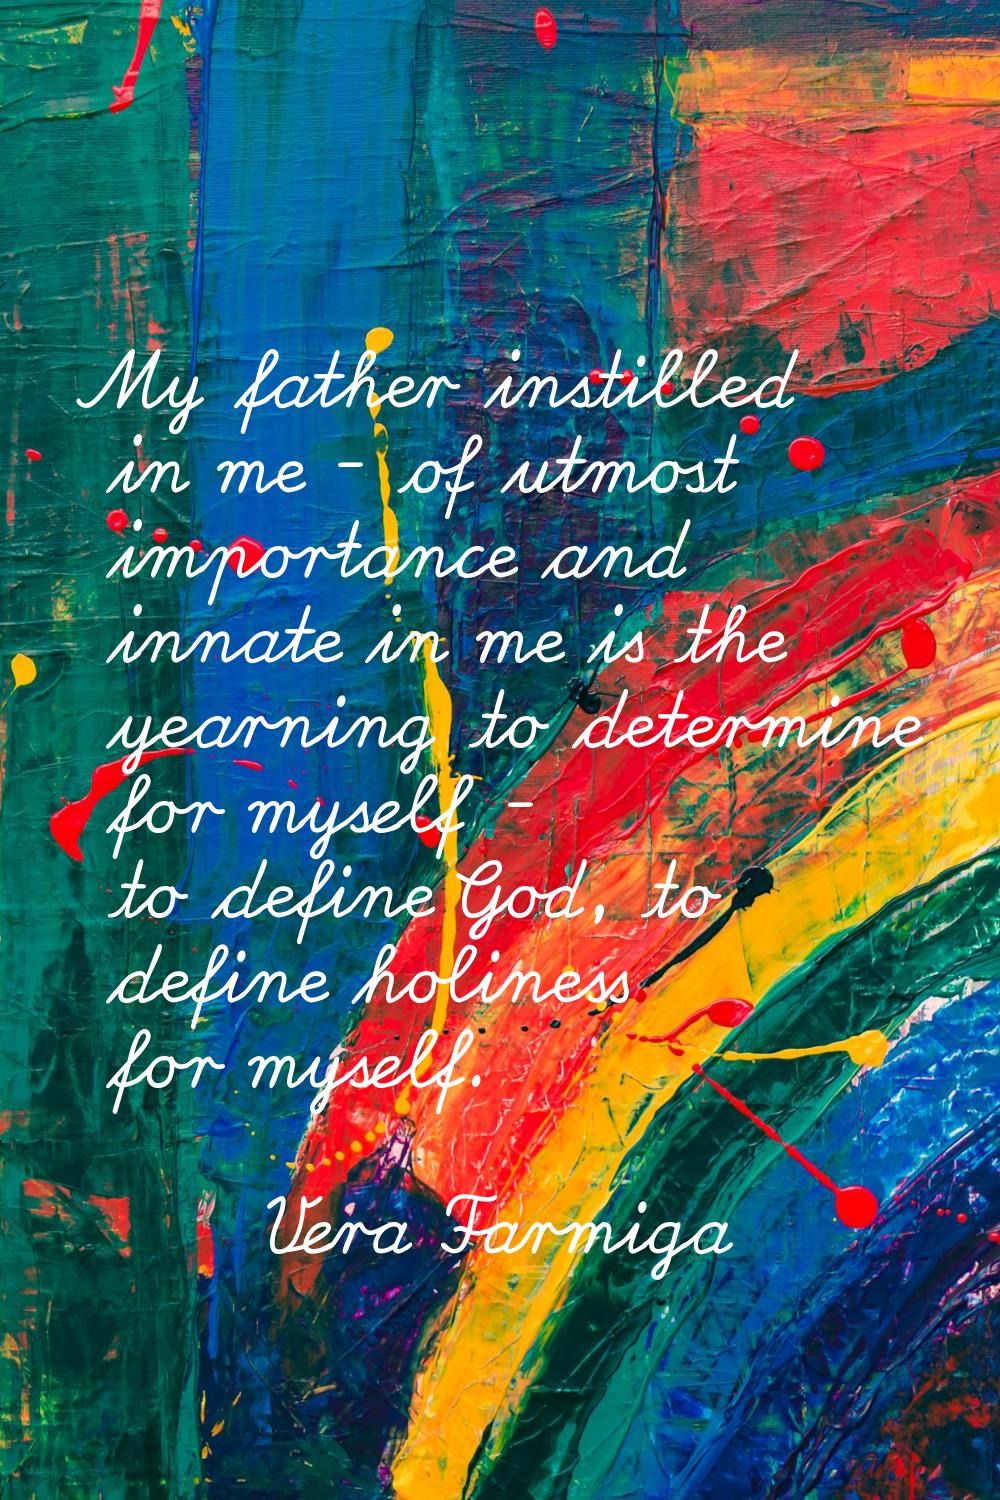 My father instilled in me - of utmost importance and innate in me is the yearning to determine for 